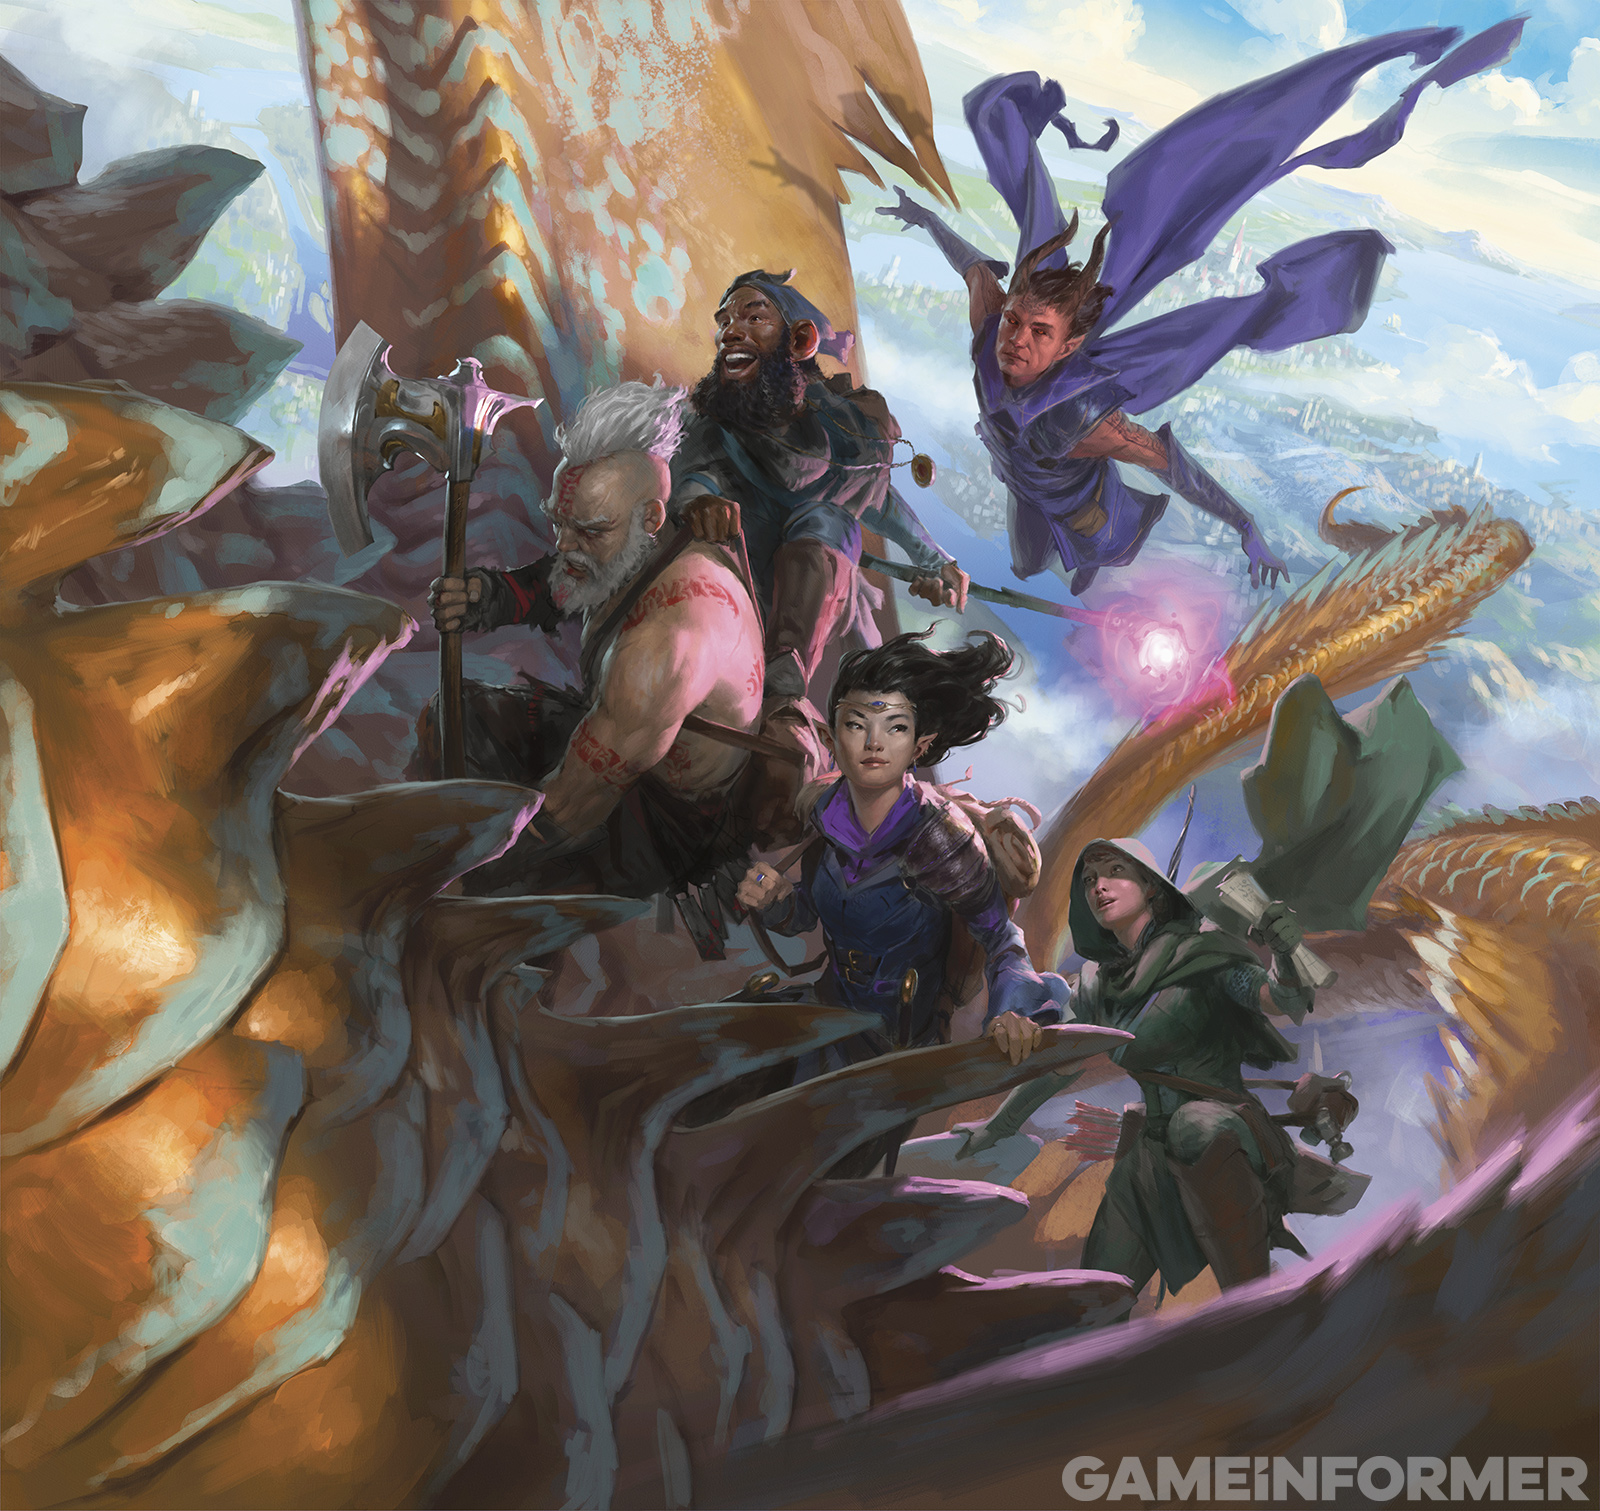 A band of adventurers flying on the back of a dragon in artwork from the Game Informer reveal